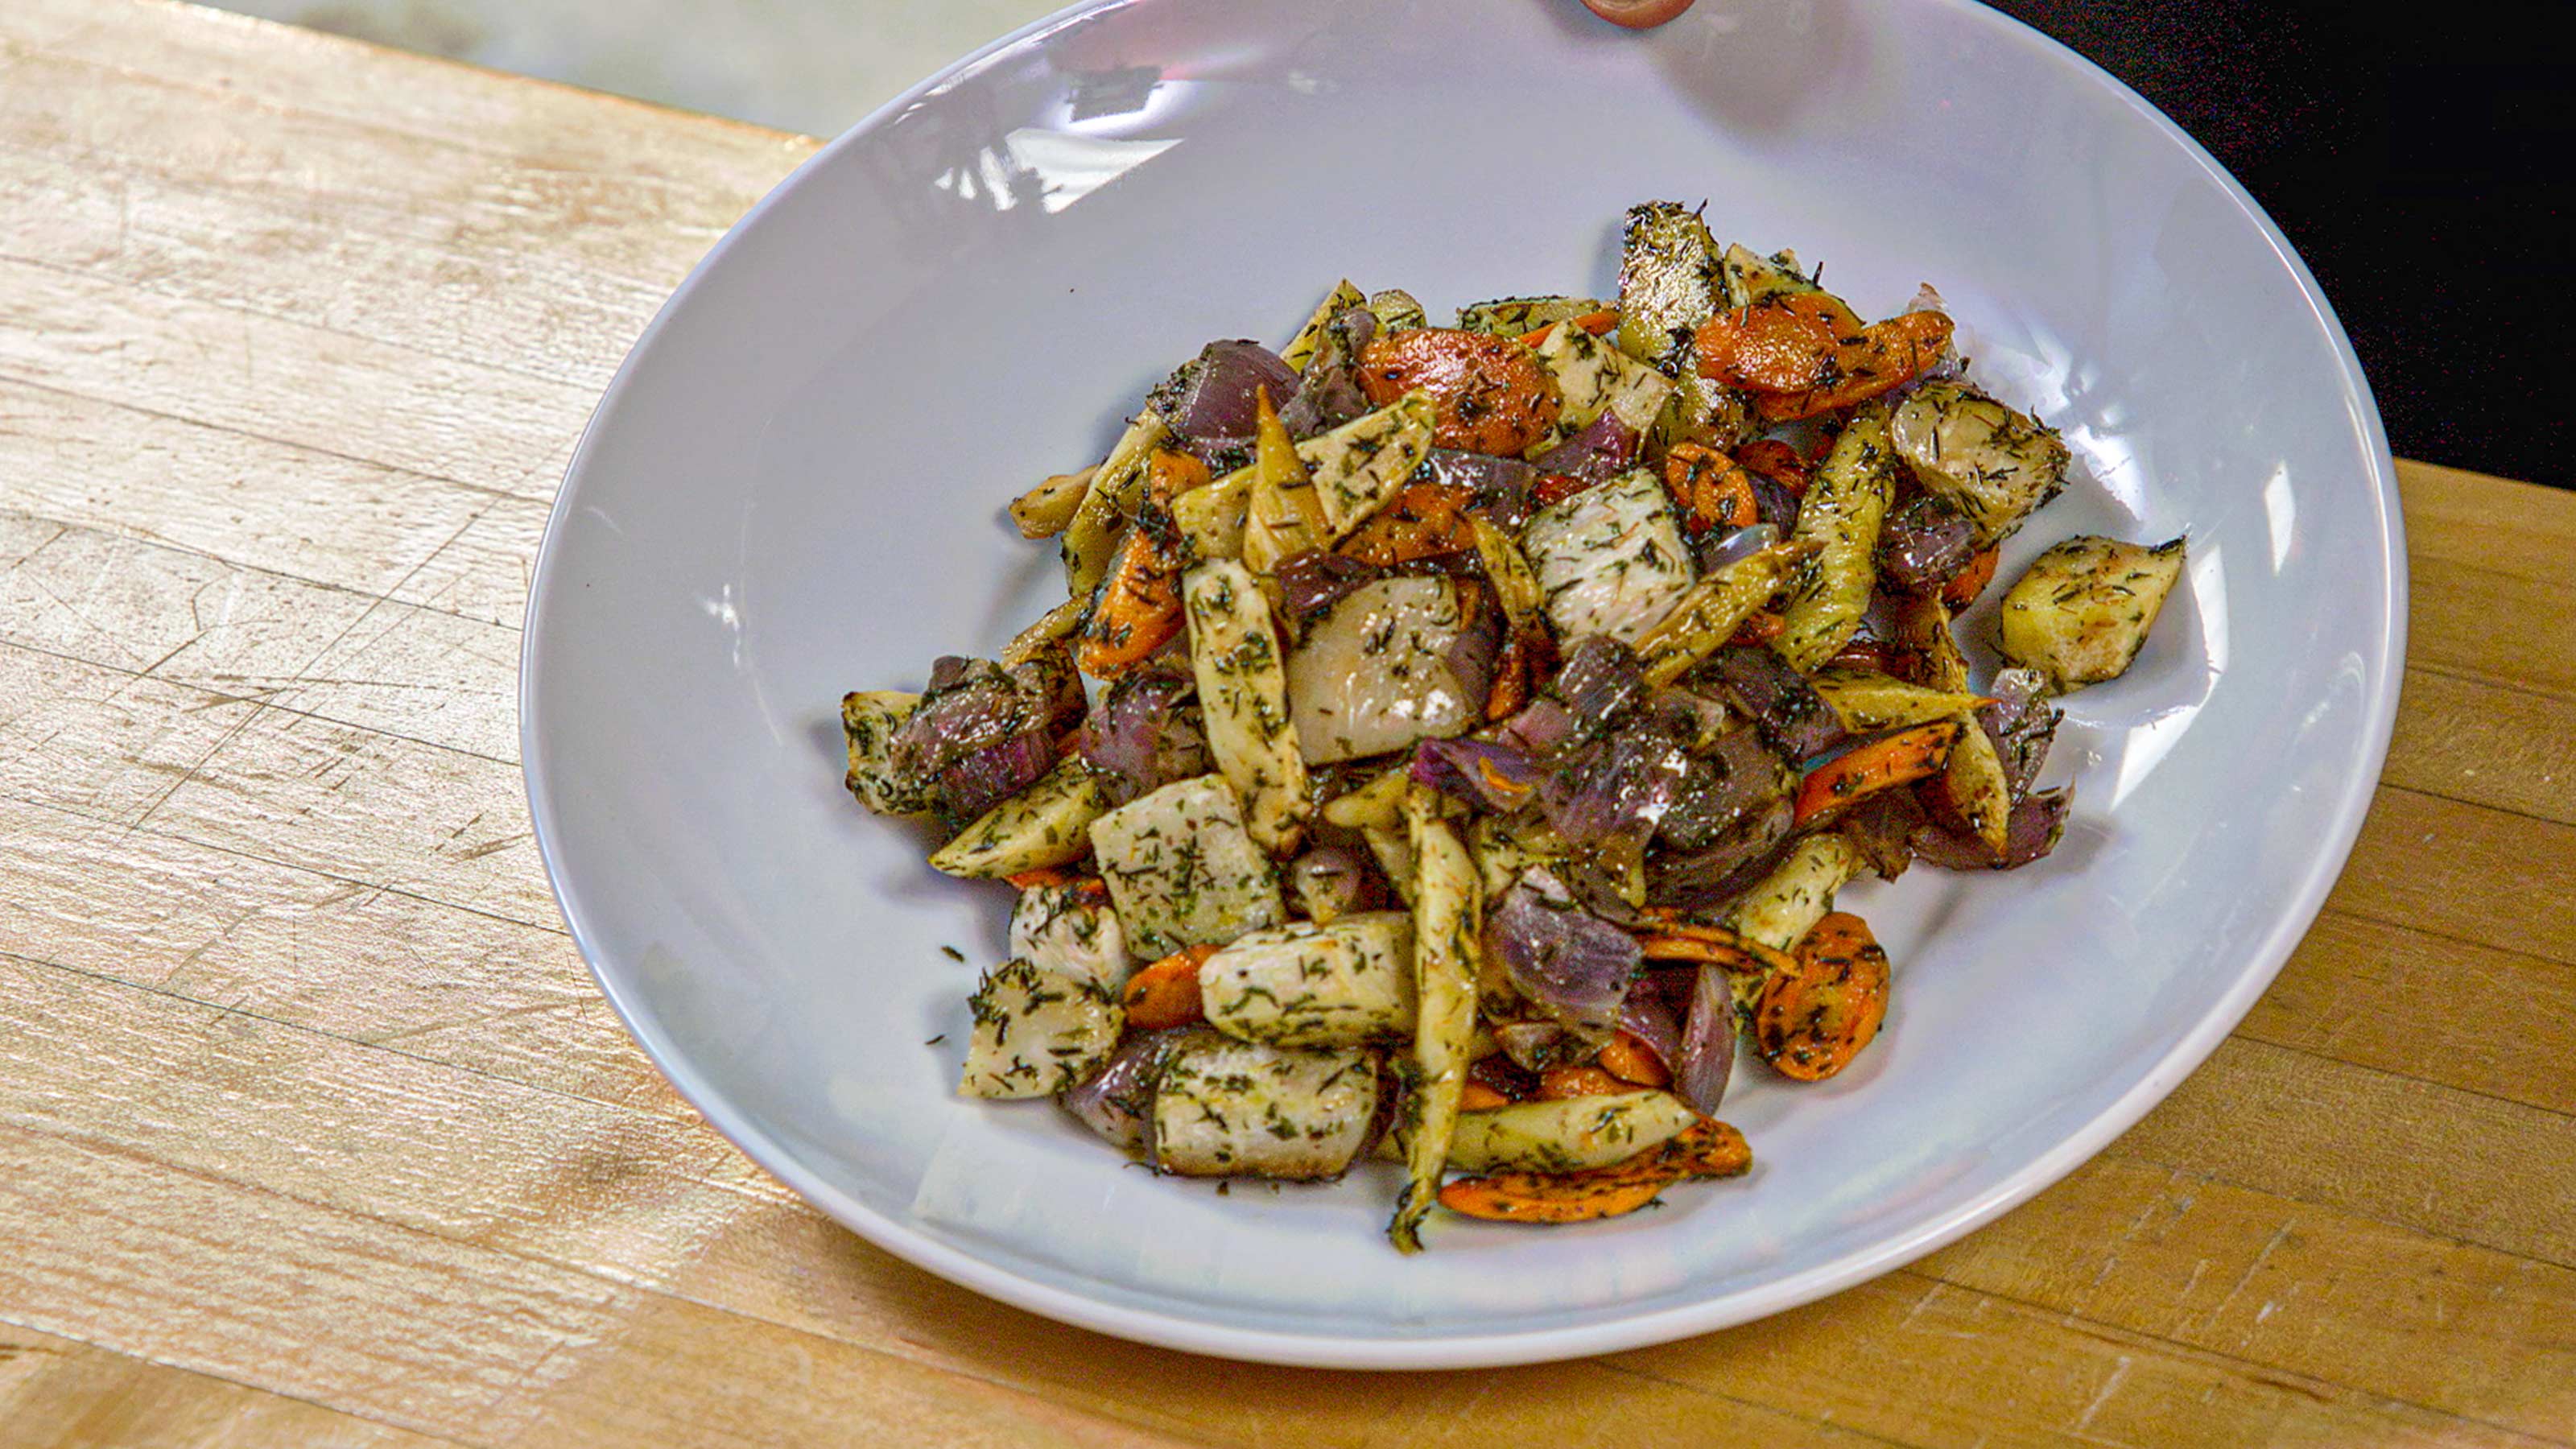 Recipe from our chefs: Herb-roasted root vegetables